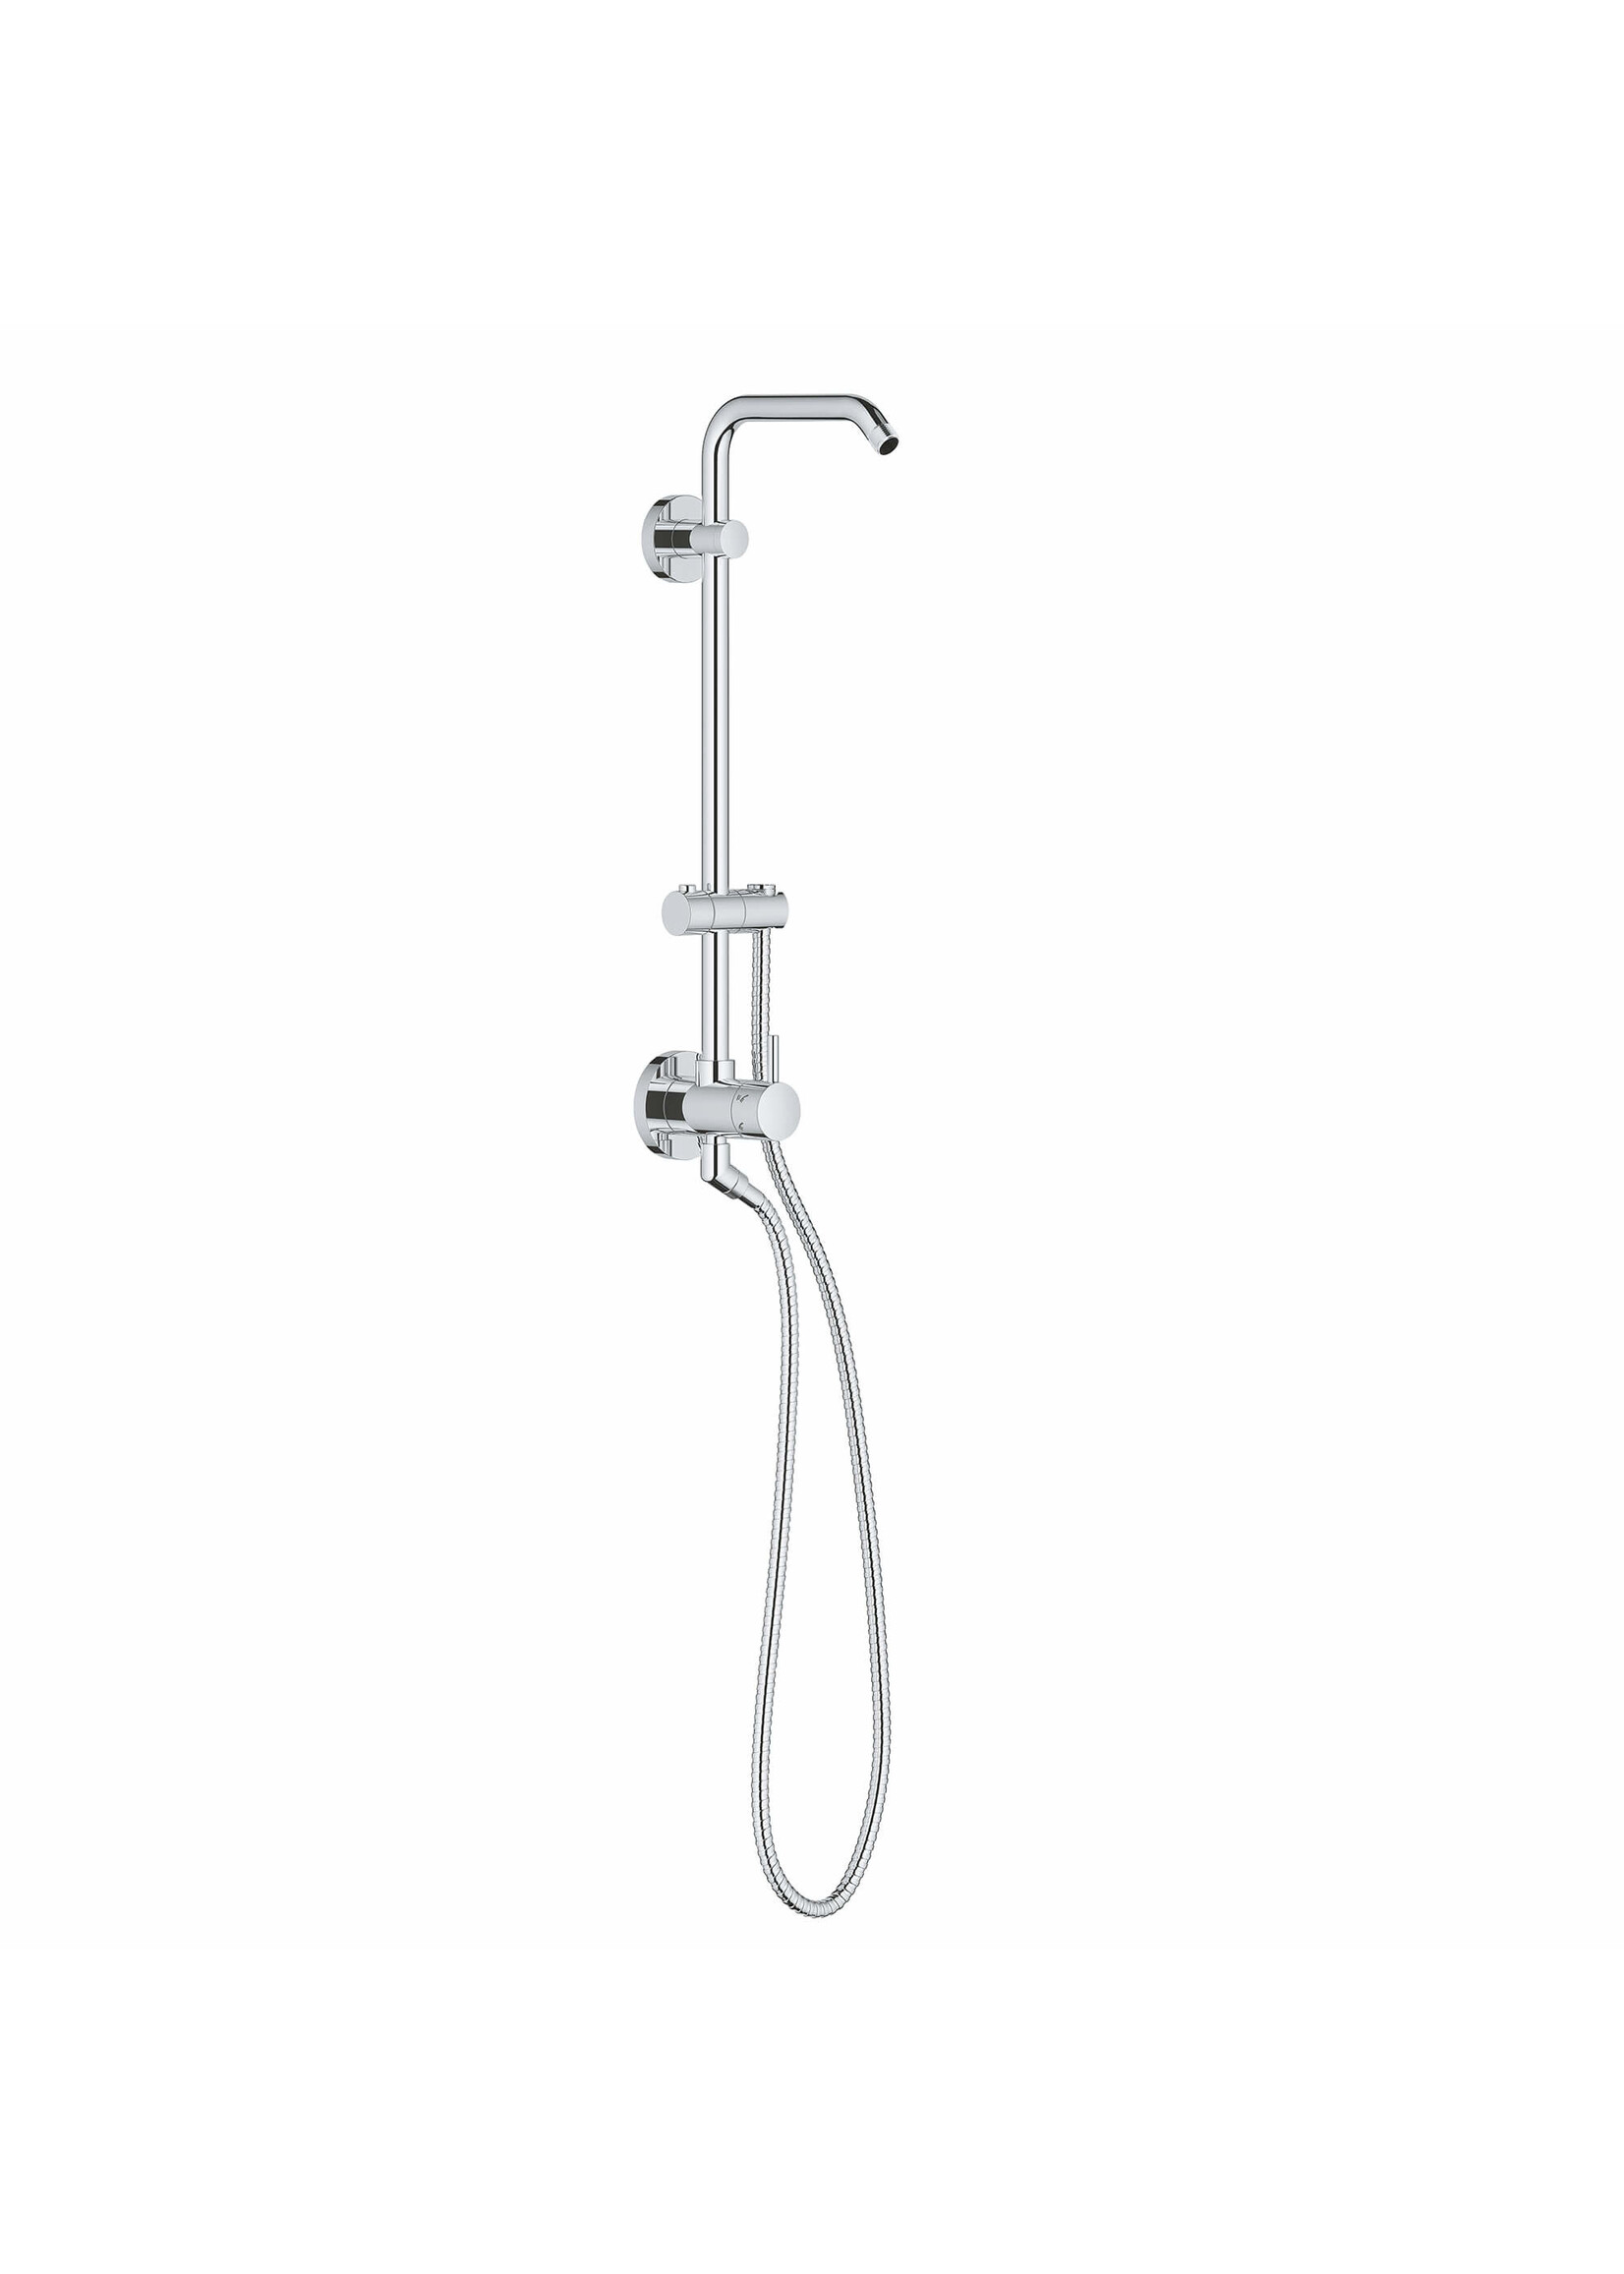 Grohe Grohe Retro-Fit 18'' Shower System,12 3 ⁄16'' Arm - Polished Chrome